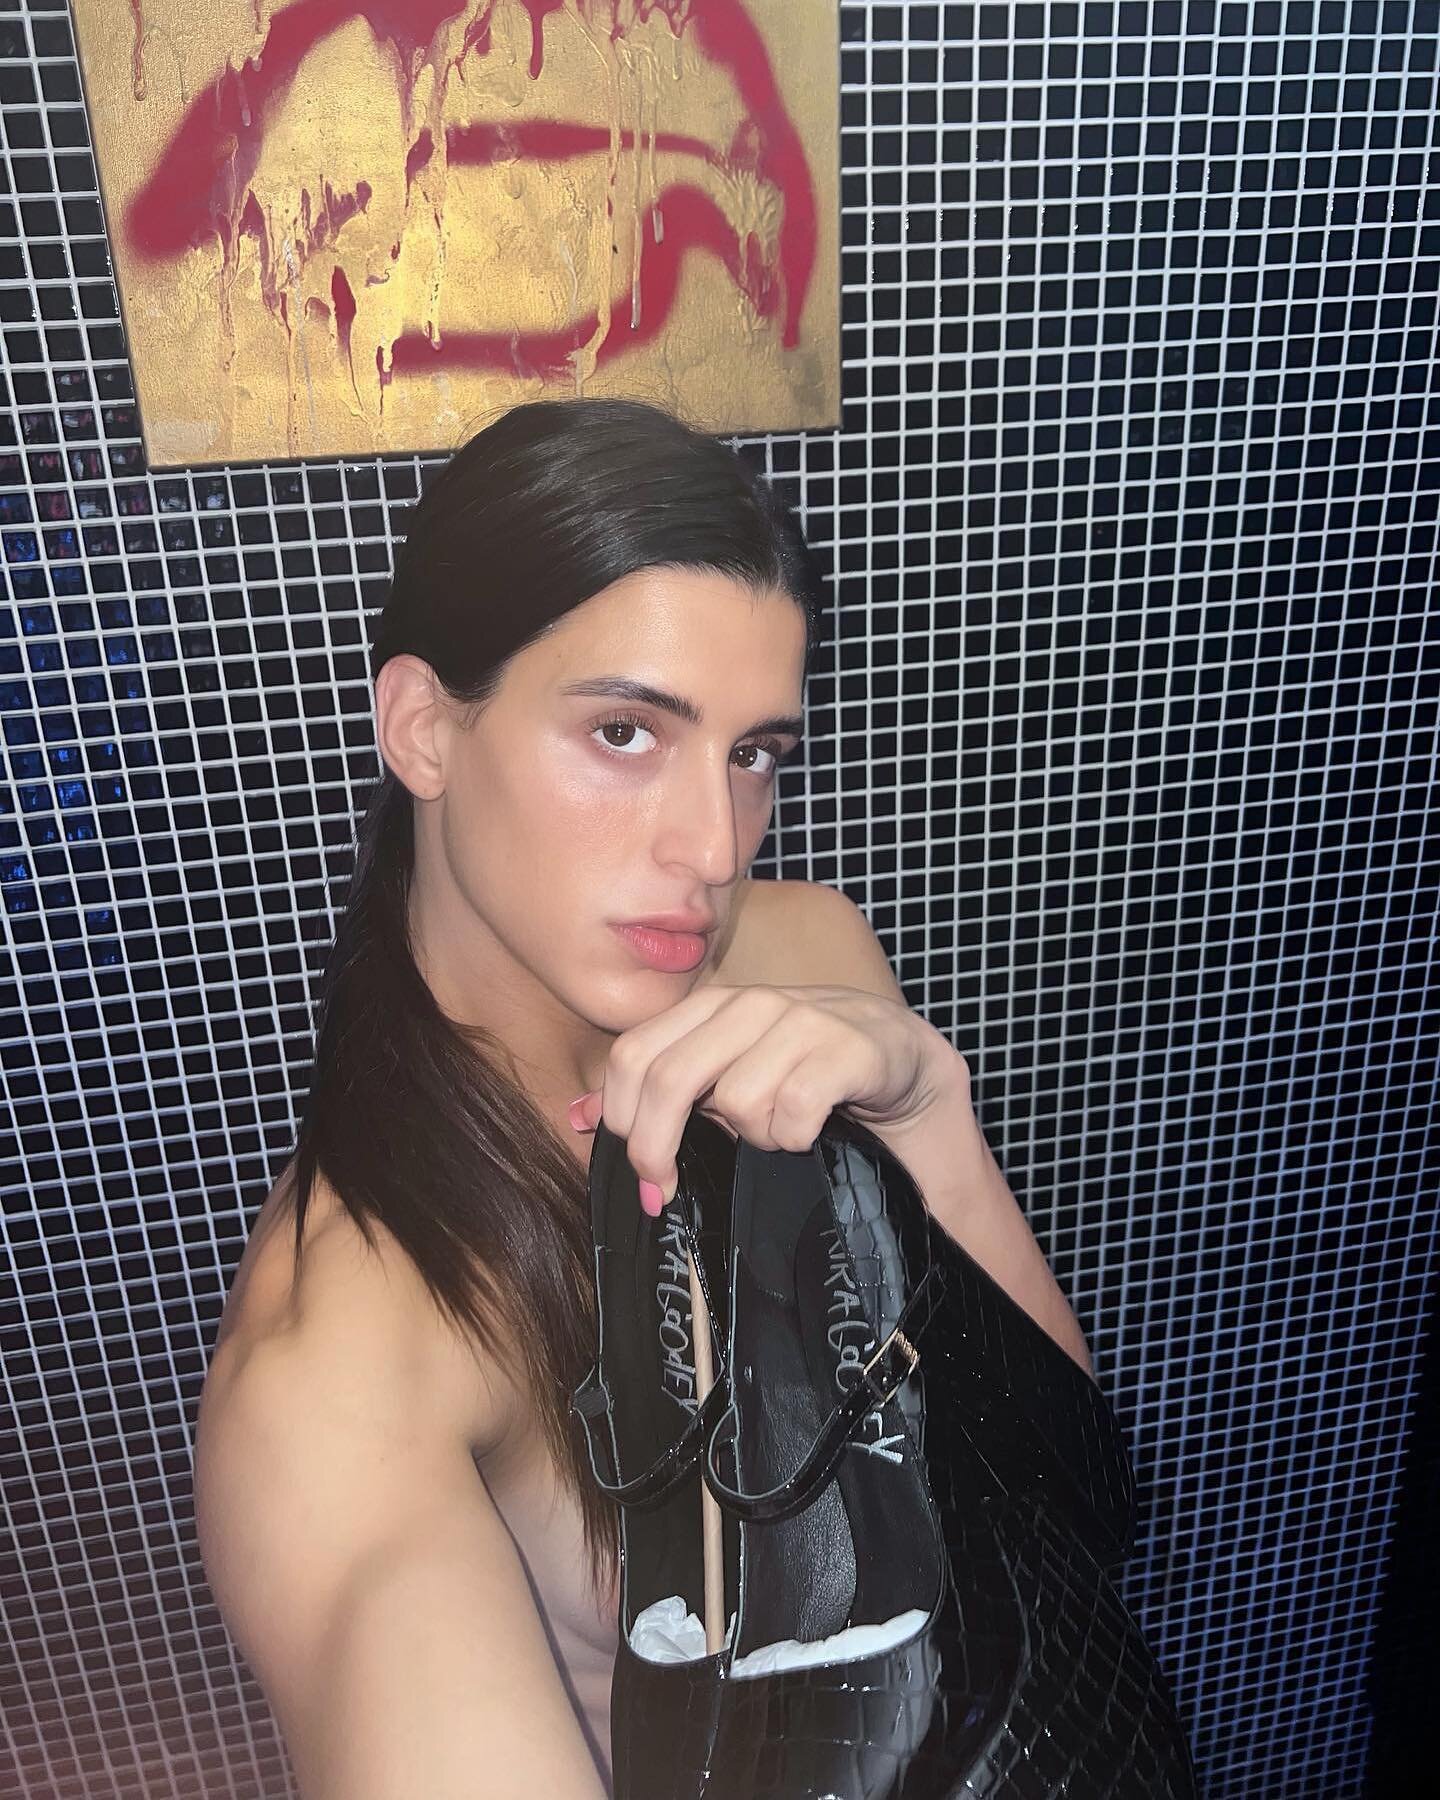 Divine @arca1000000 looking perfection as always with the  exploded platform Mary Janes ❤️&zwj;🔥

love ya babes! (づ￣ &sup3;￣)づ